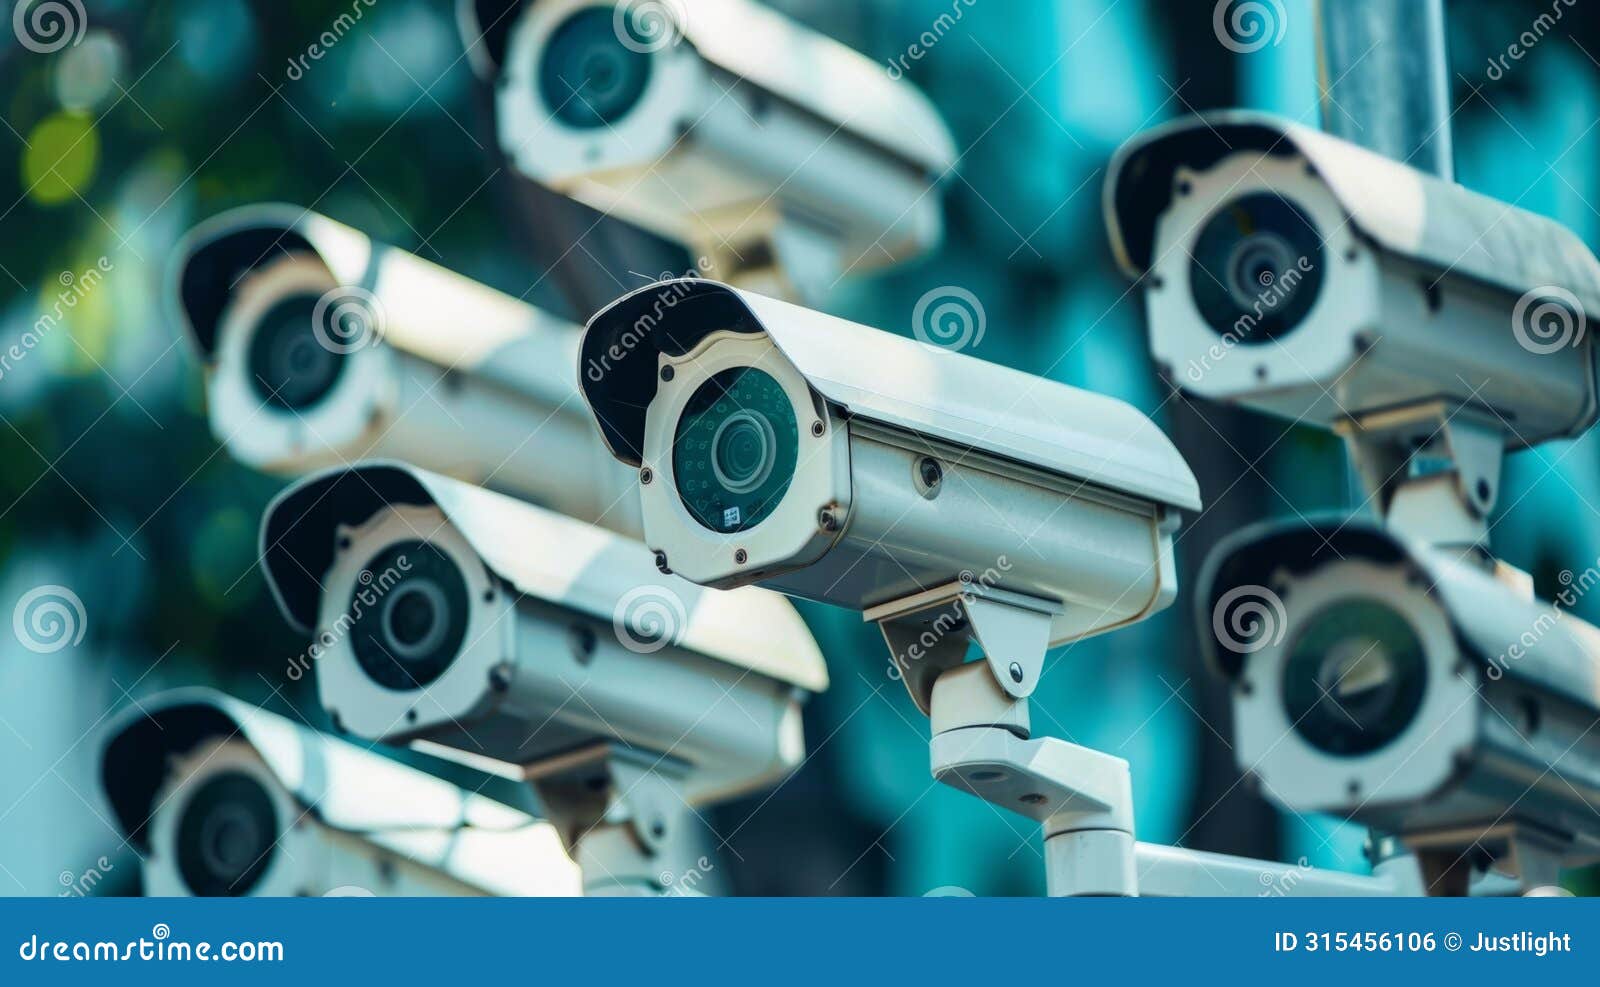 a network of surveillance cameras set up to monitor potential smuggling routes and illicit trade activities.